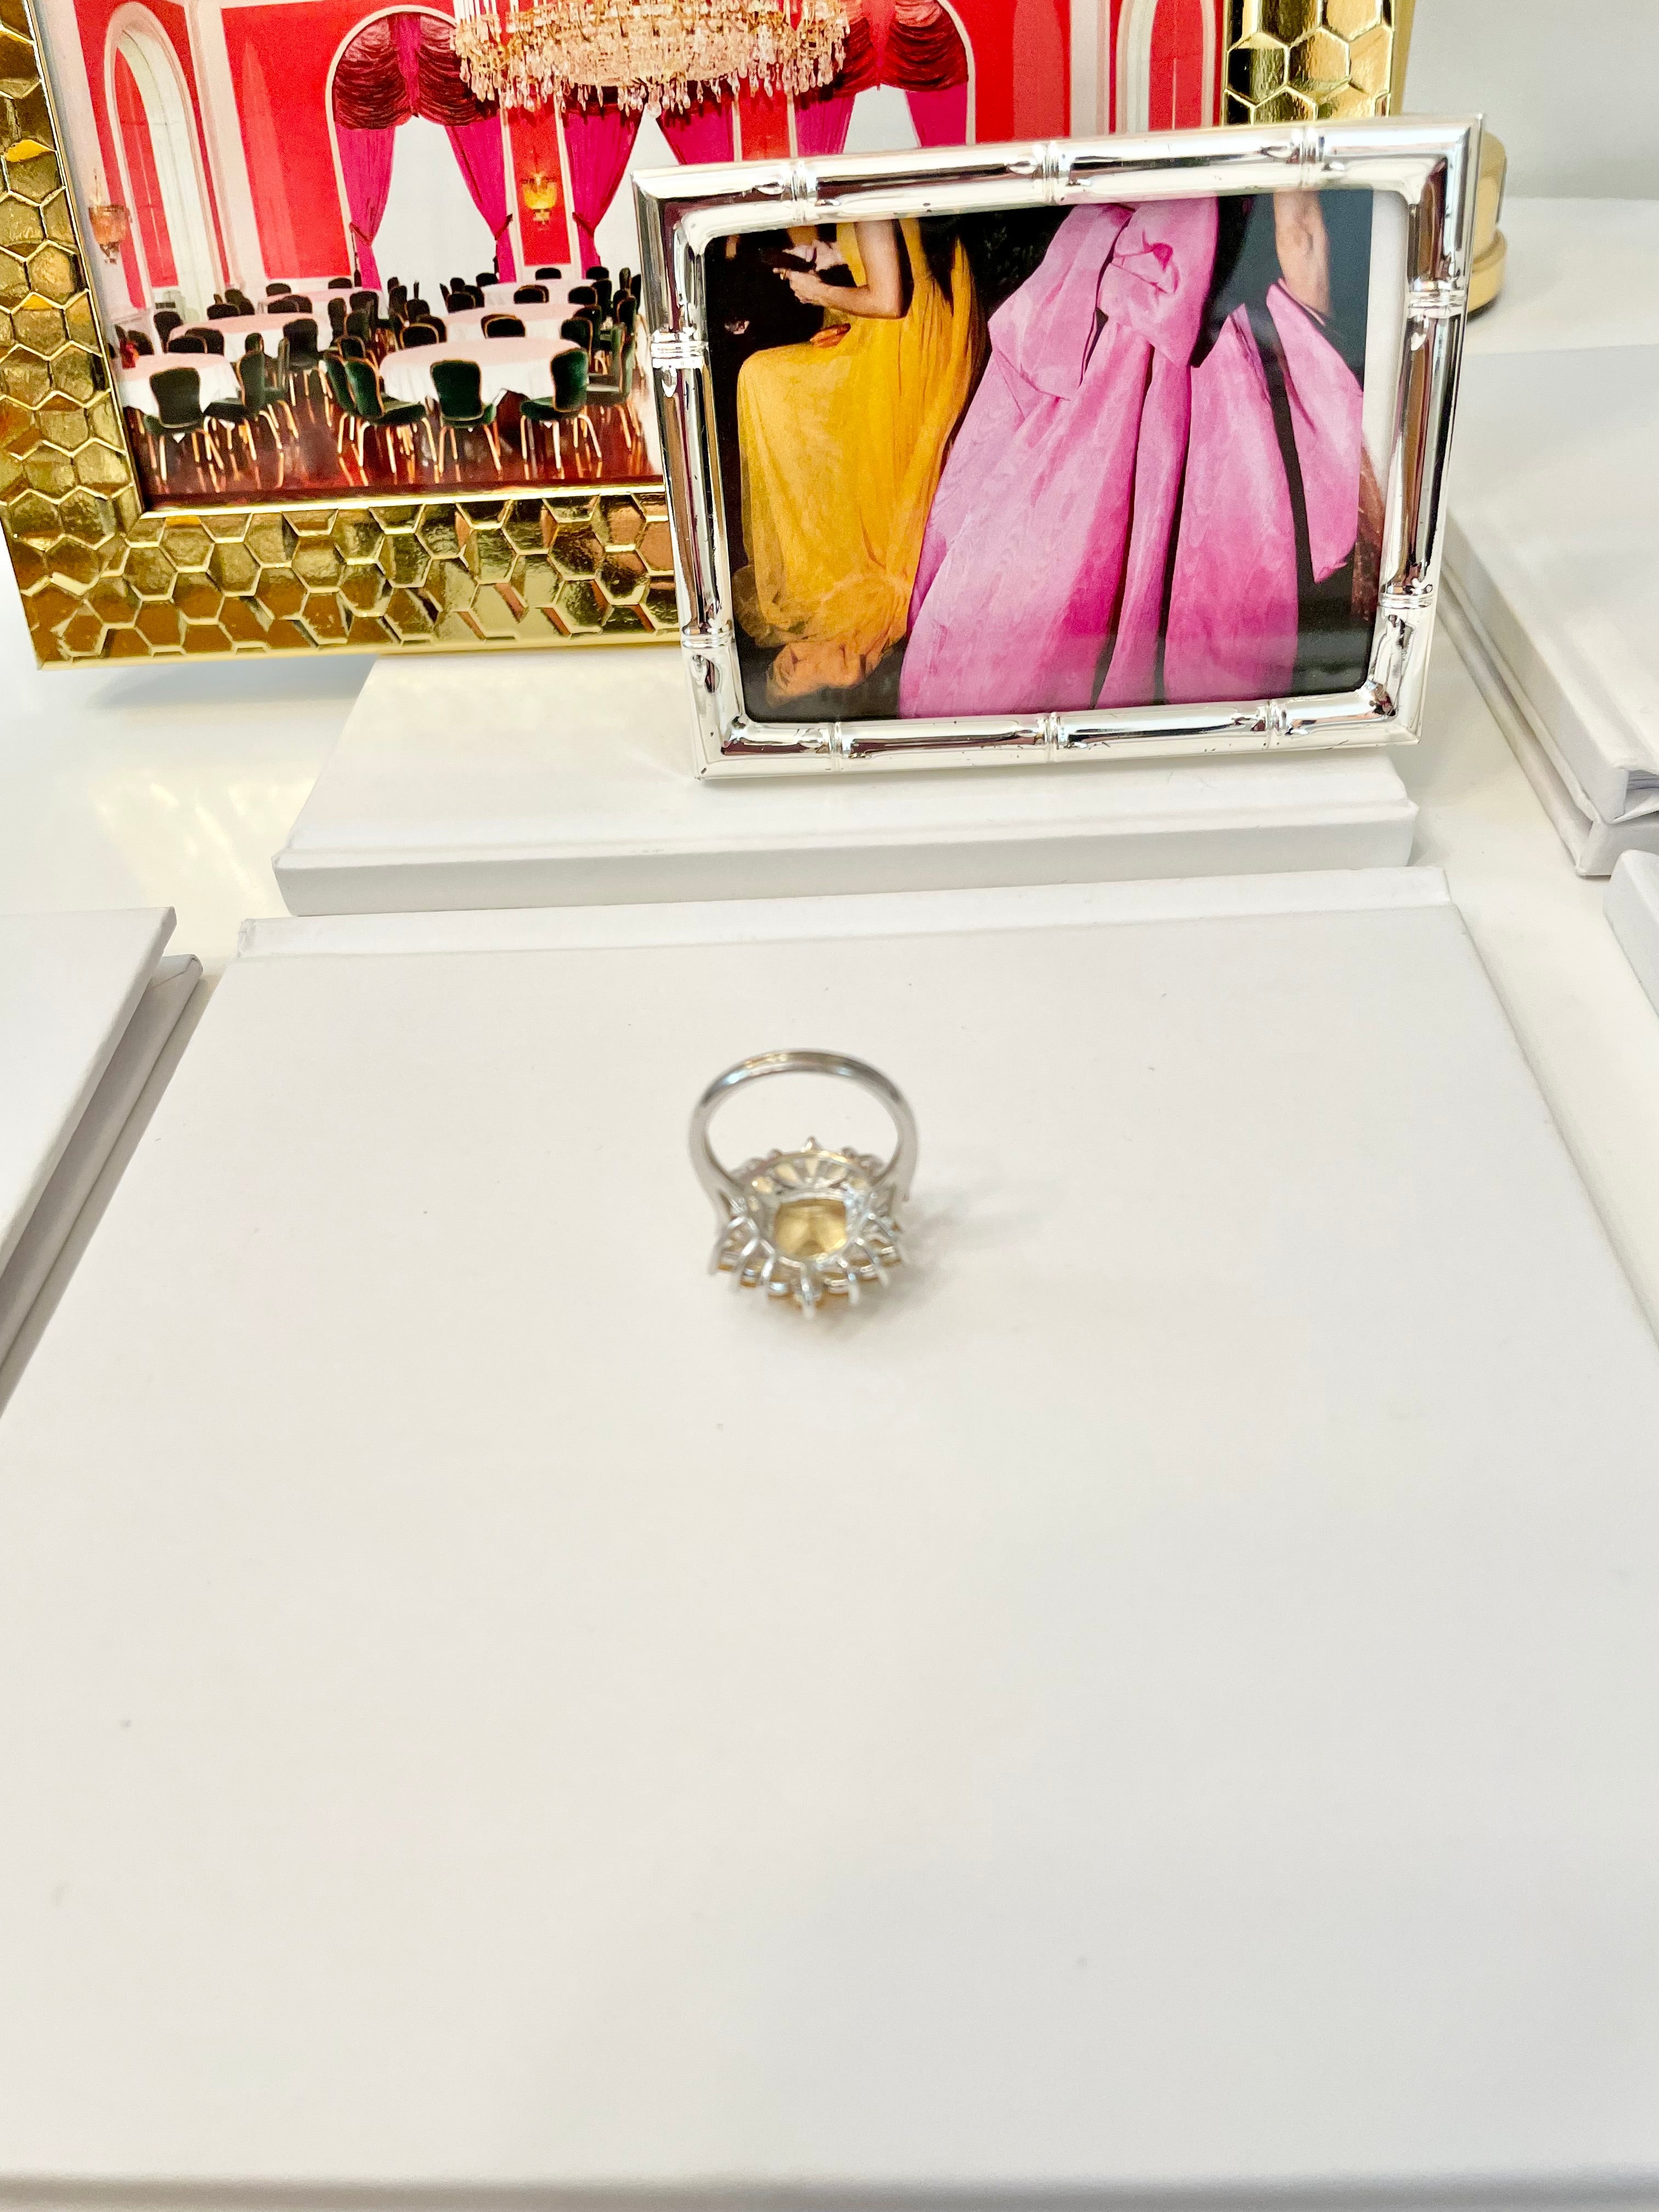 The most lovely citrine glass cocktail ring... so classic.